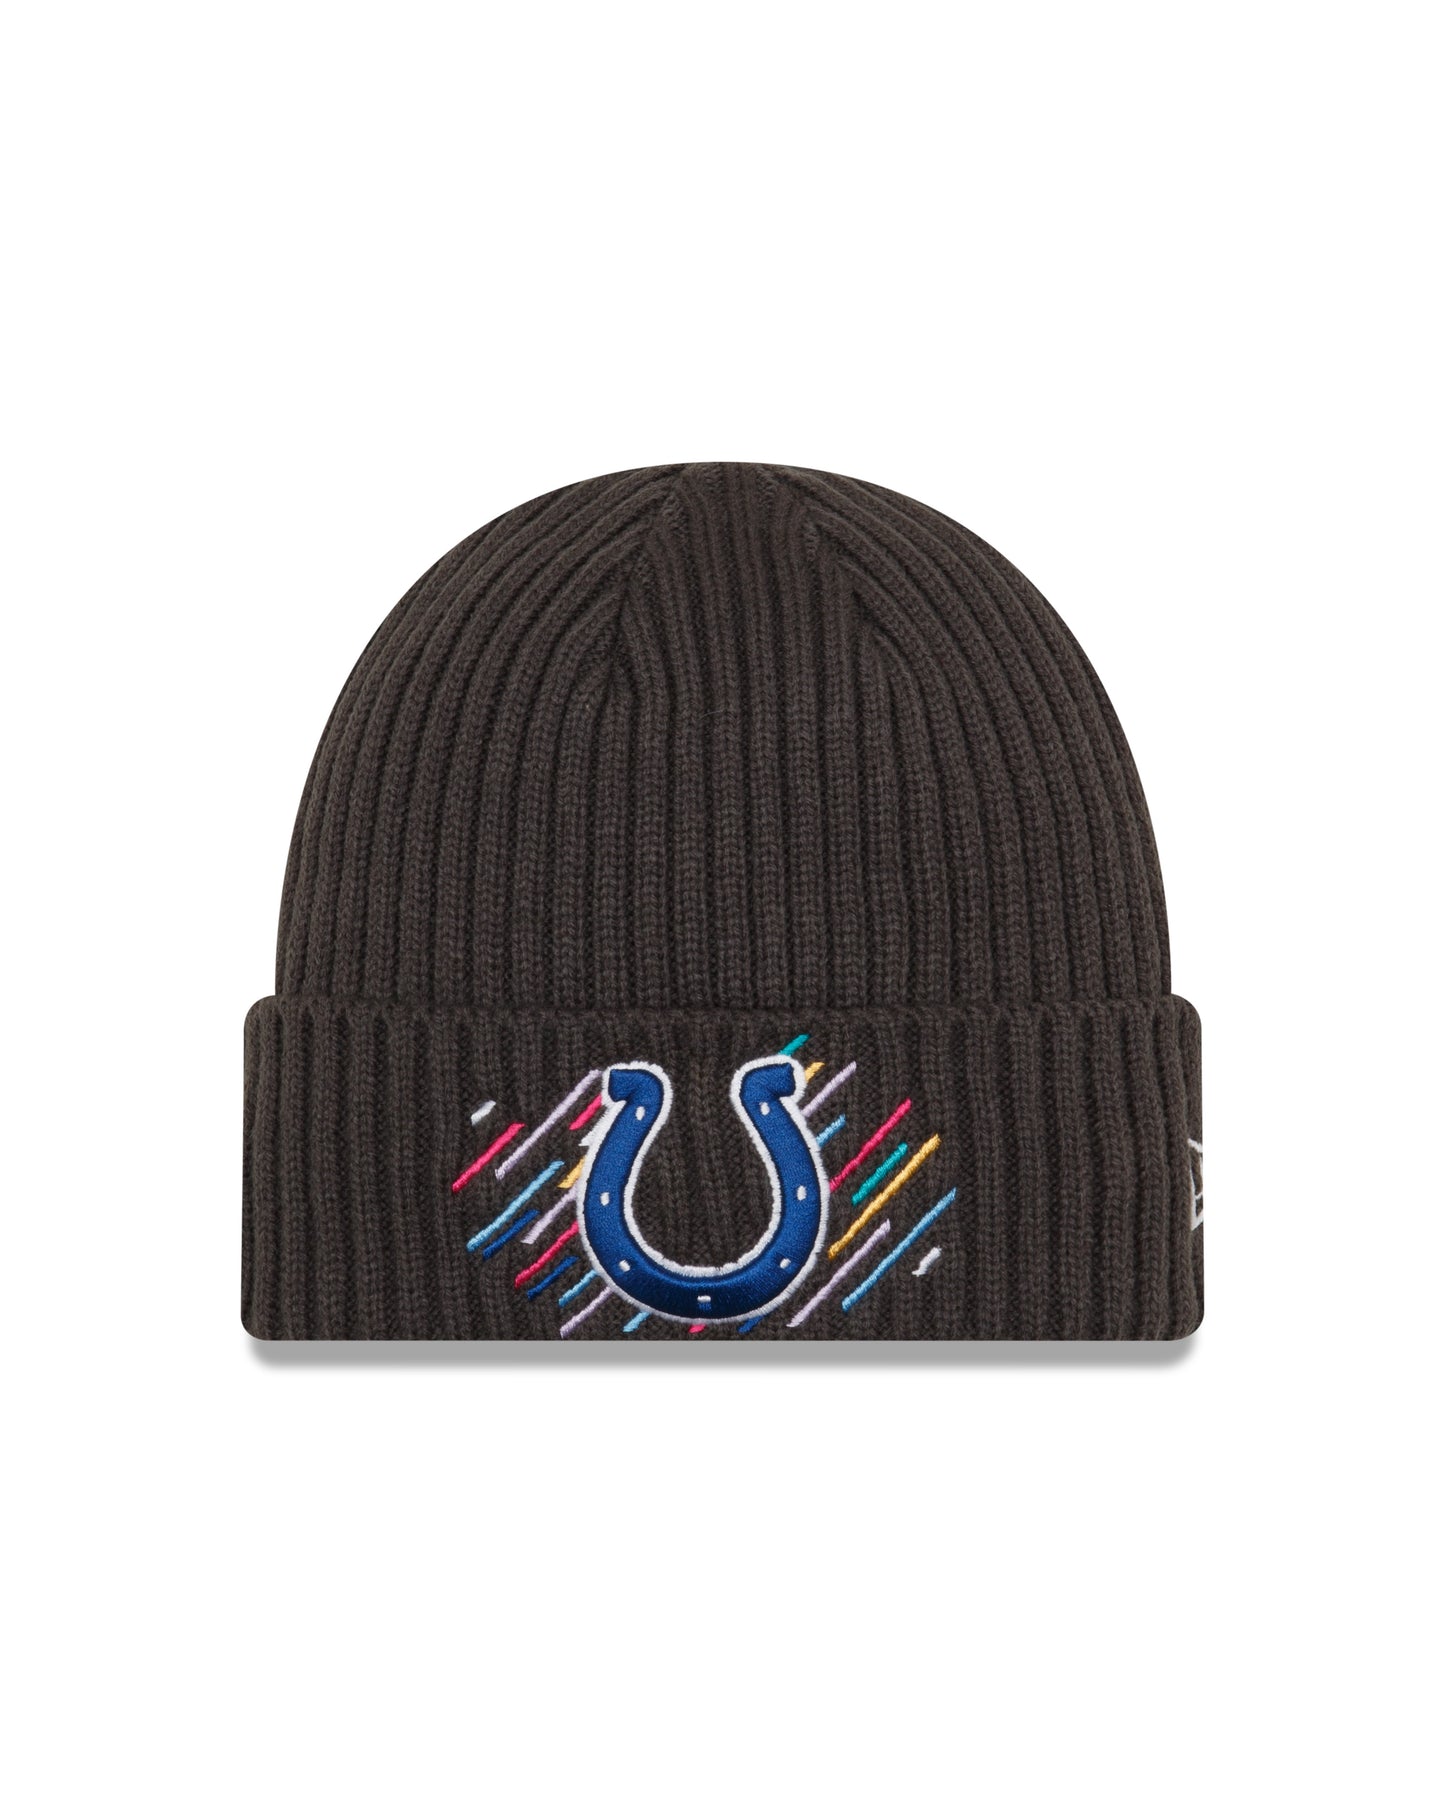 Indianapolis Colts New Era Crucial Catch Cuffed Knit Hat - Gray